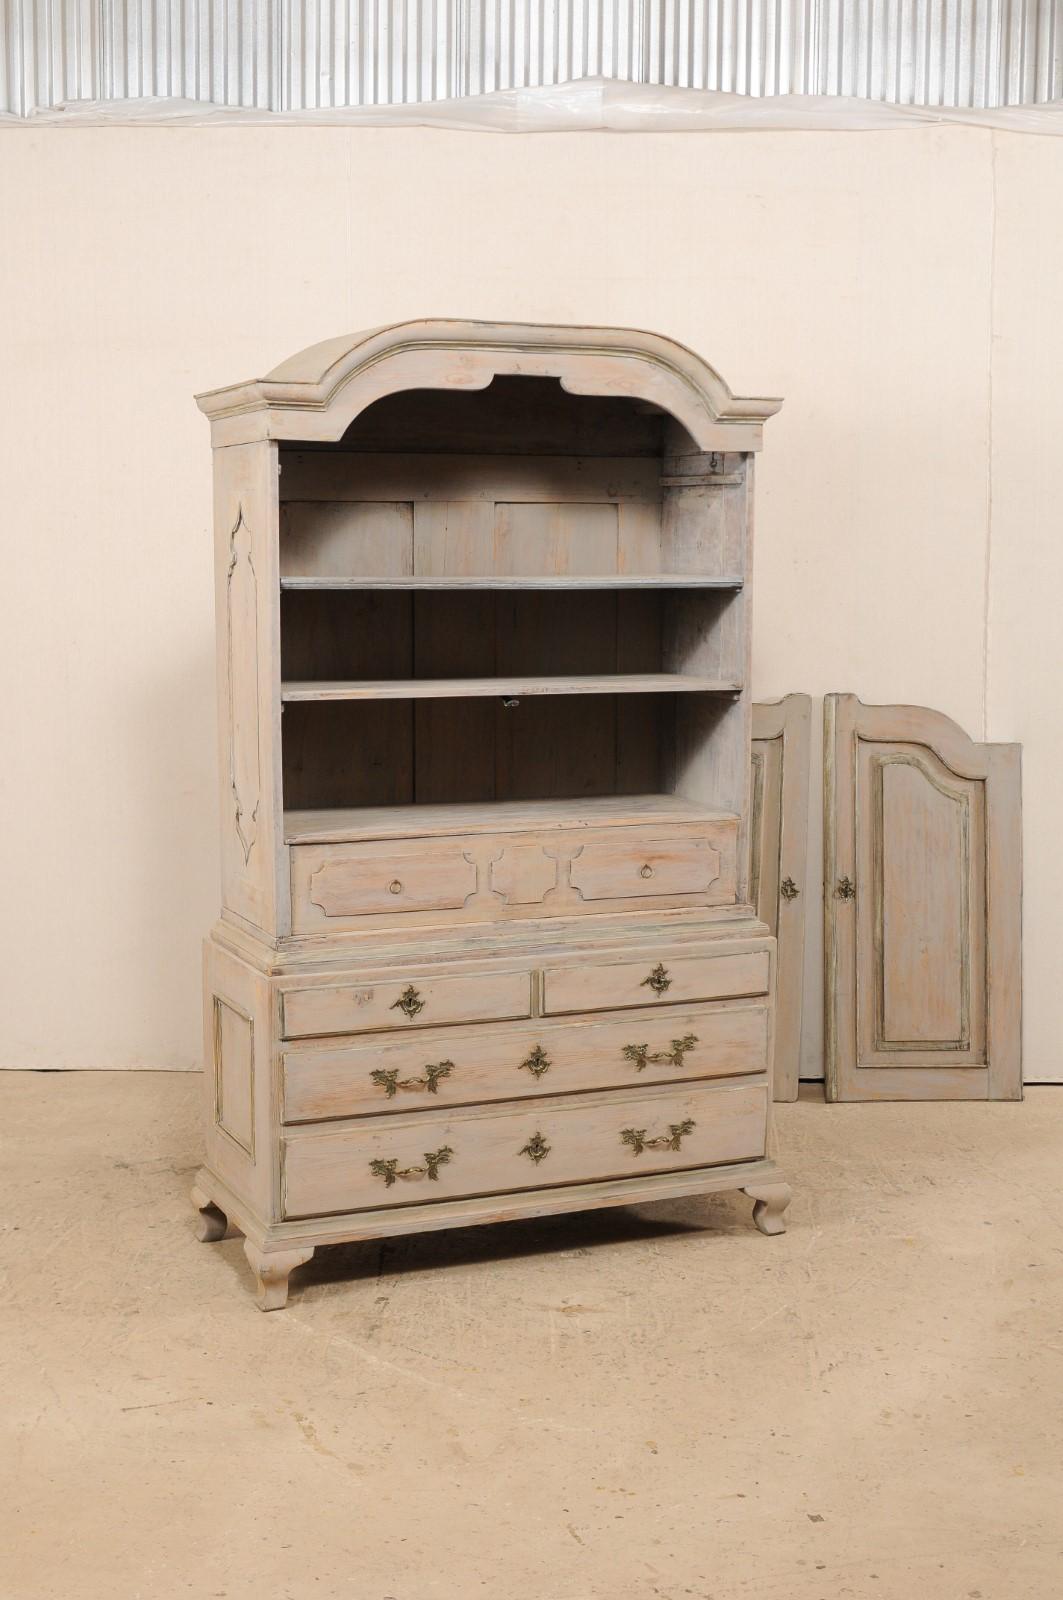 An 18th C. Swedish Period Rococo Tall Painted Wood Cabinet w/Arched Pediment 1